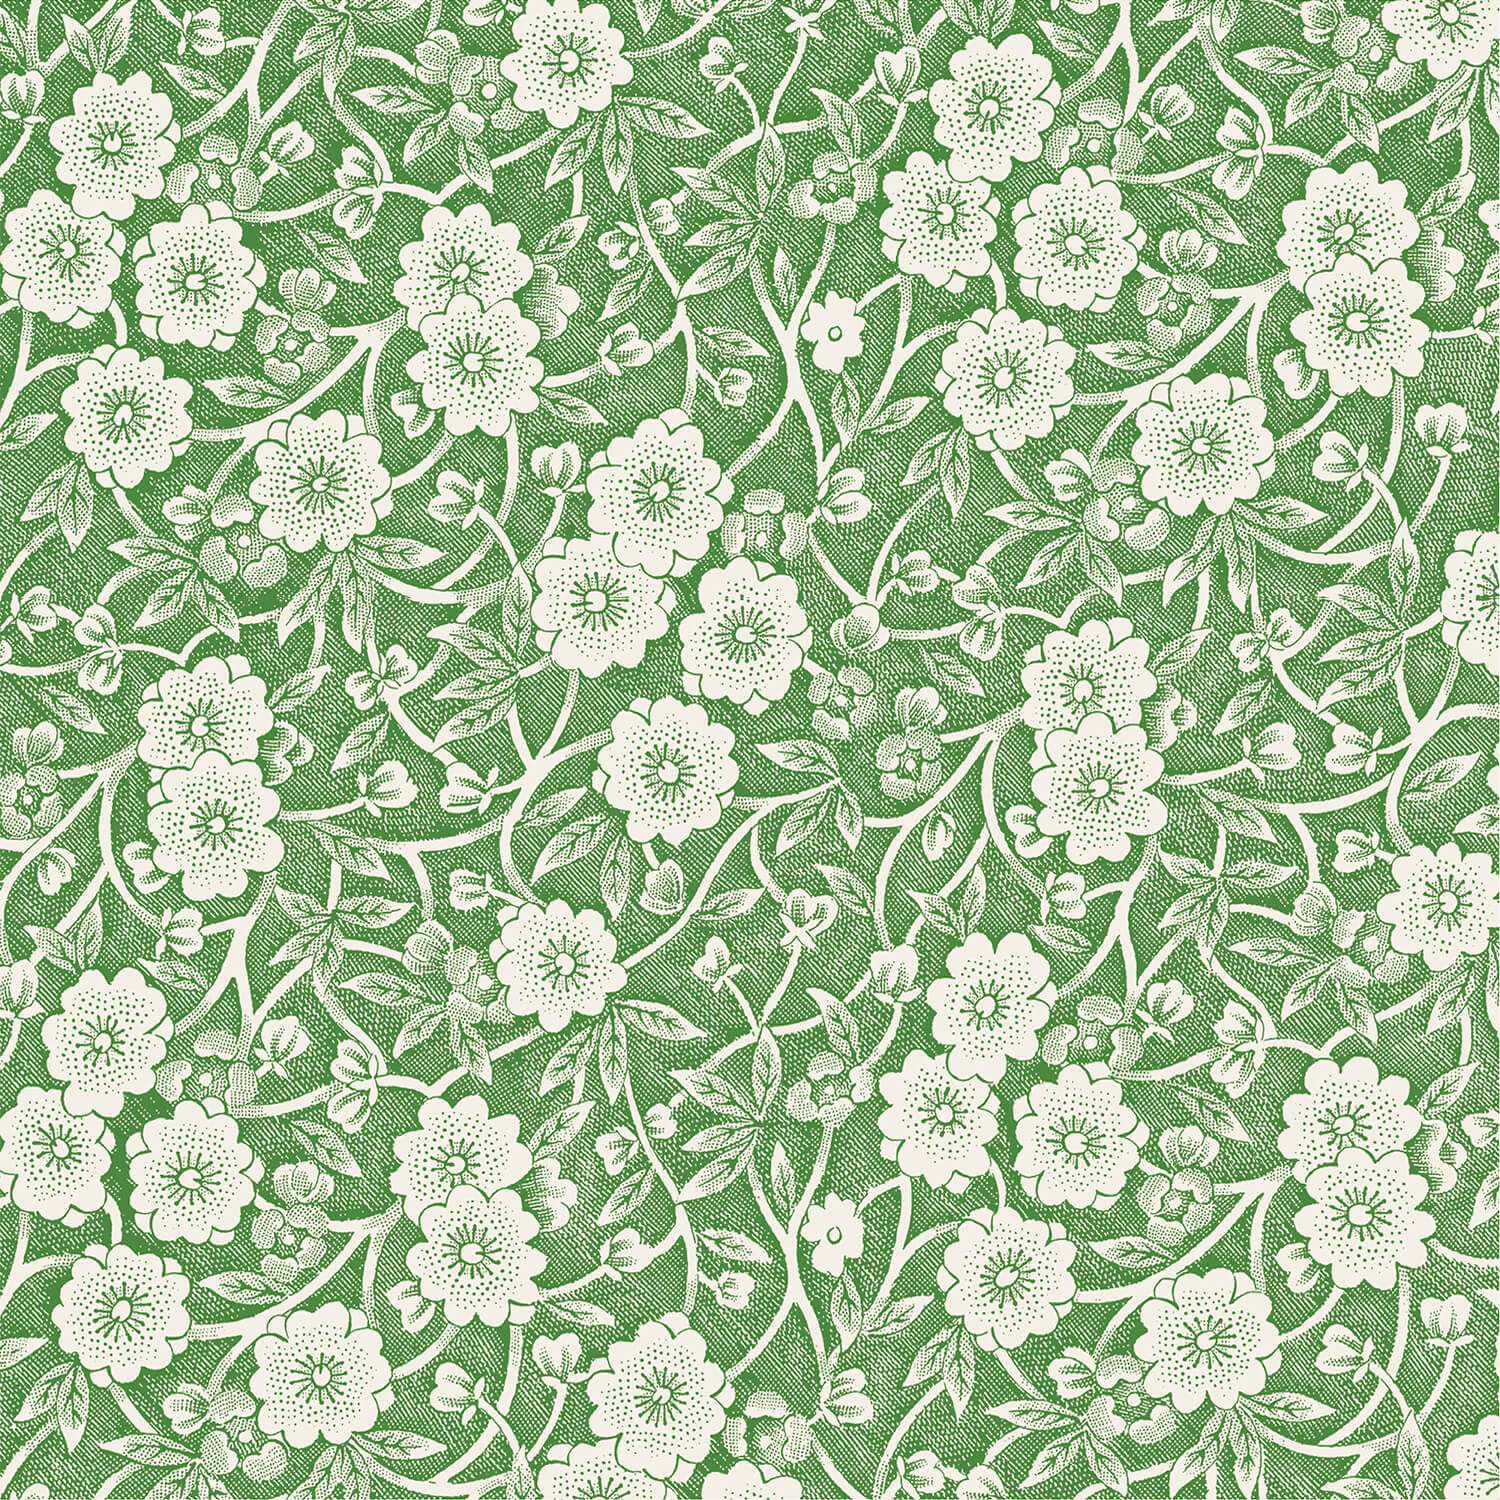 A collection of Green Calico napkins by Hester &amp; Cook, featuring white flowers, ideal for table settings.